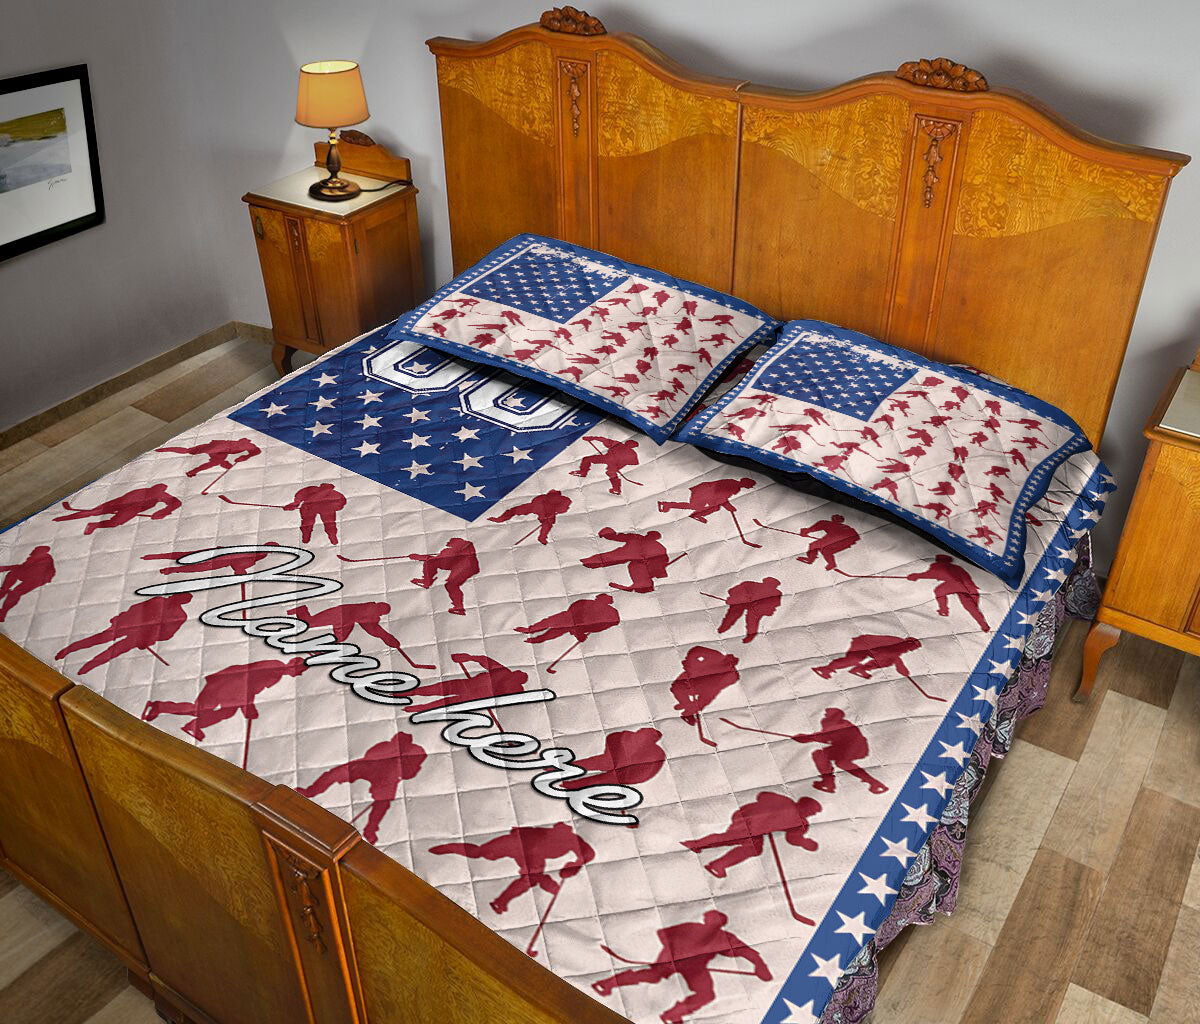 Ohaprints-Quilt-Bed-Set-Pillowcase-Hockey-Fan-Lover-Player-Posing-America-Us-Flag-Custom-Personalized-Name-Number-Blanket-Bedspread-Bedding-2602-Queen (80'' x 90'')